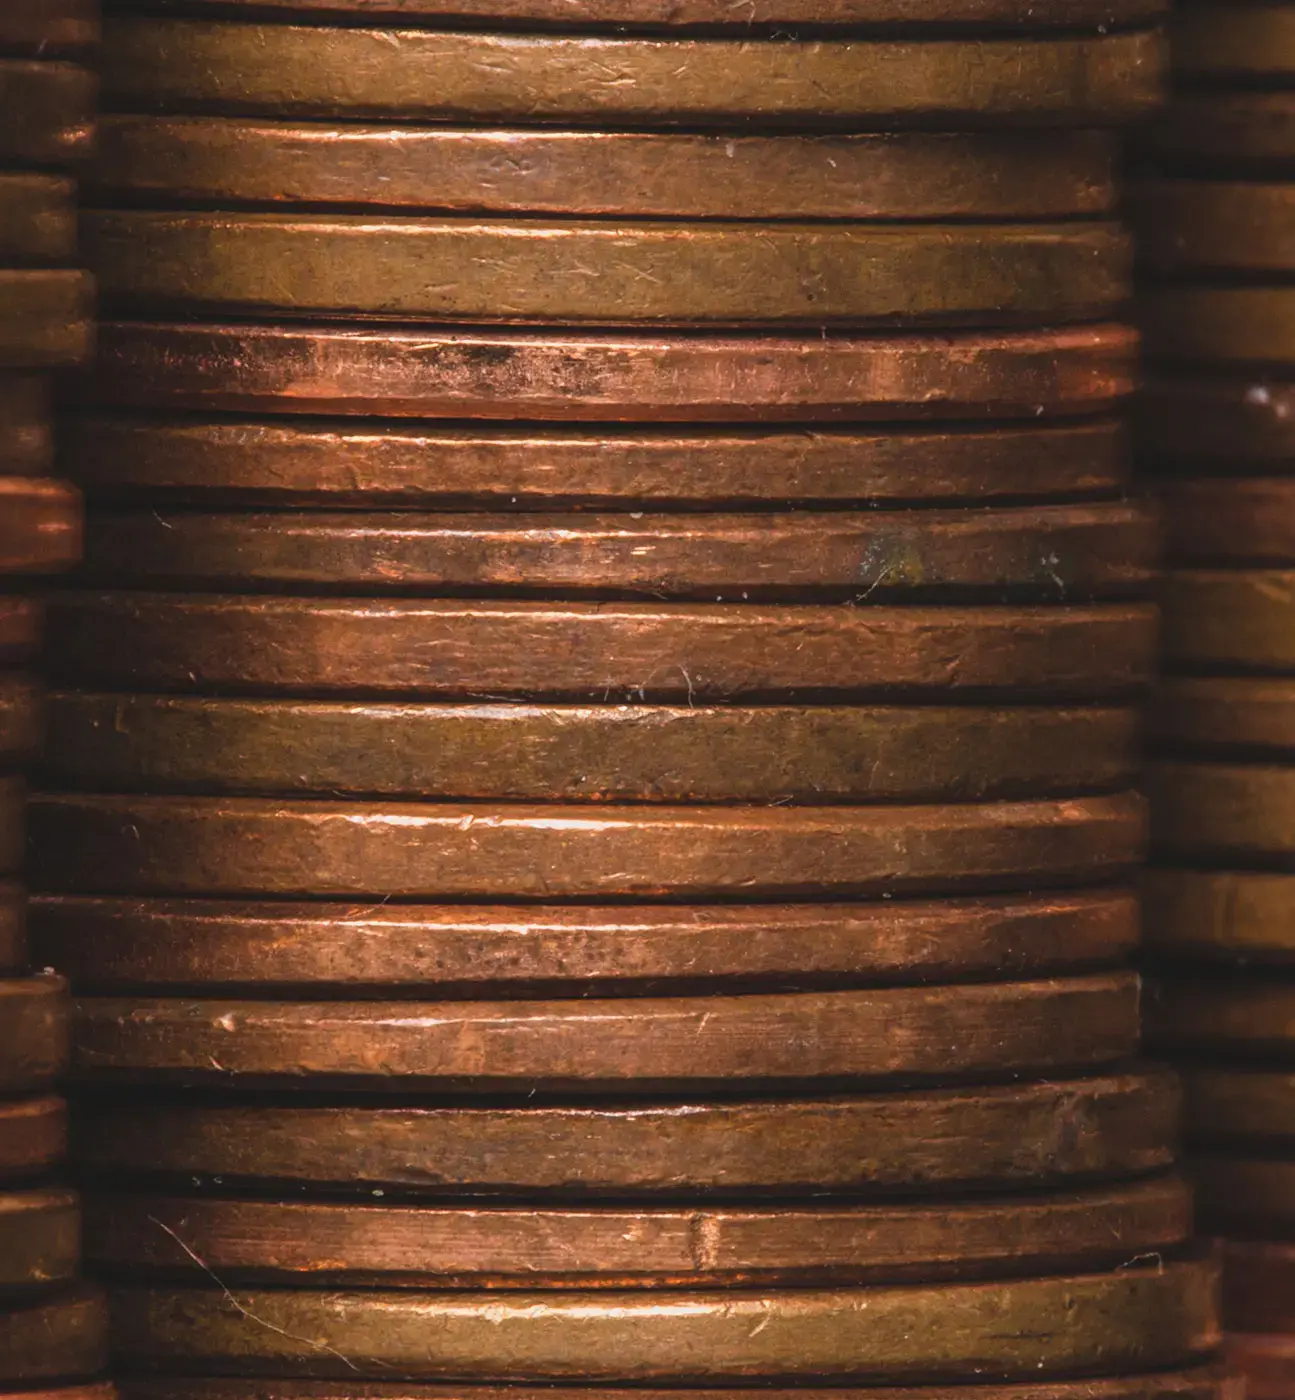 stacked-coins-close-up